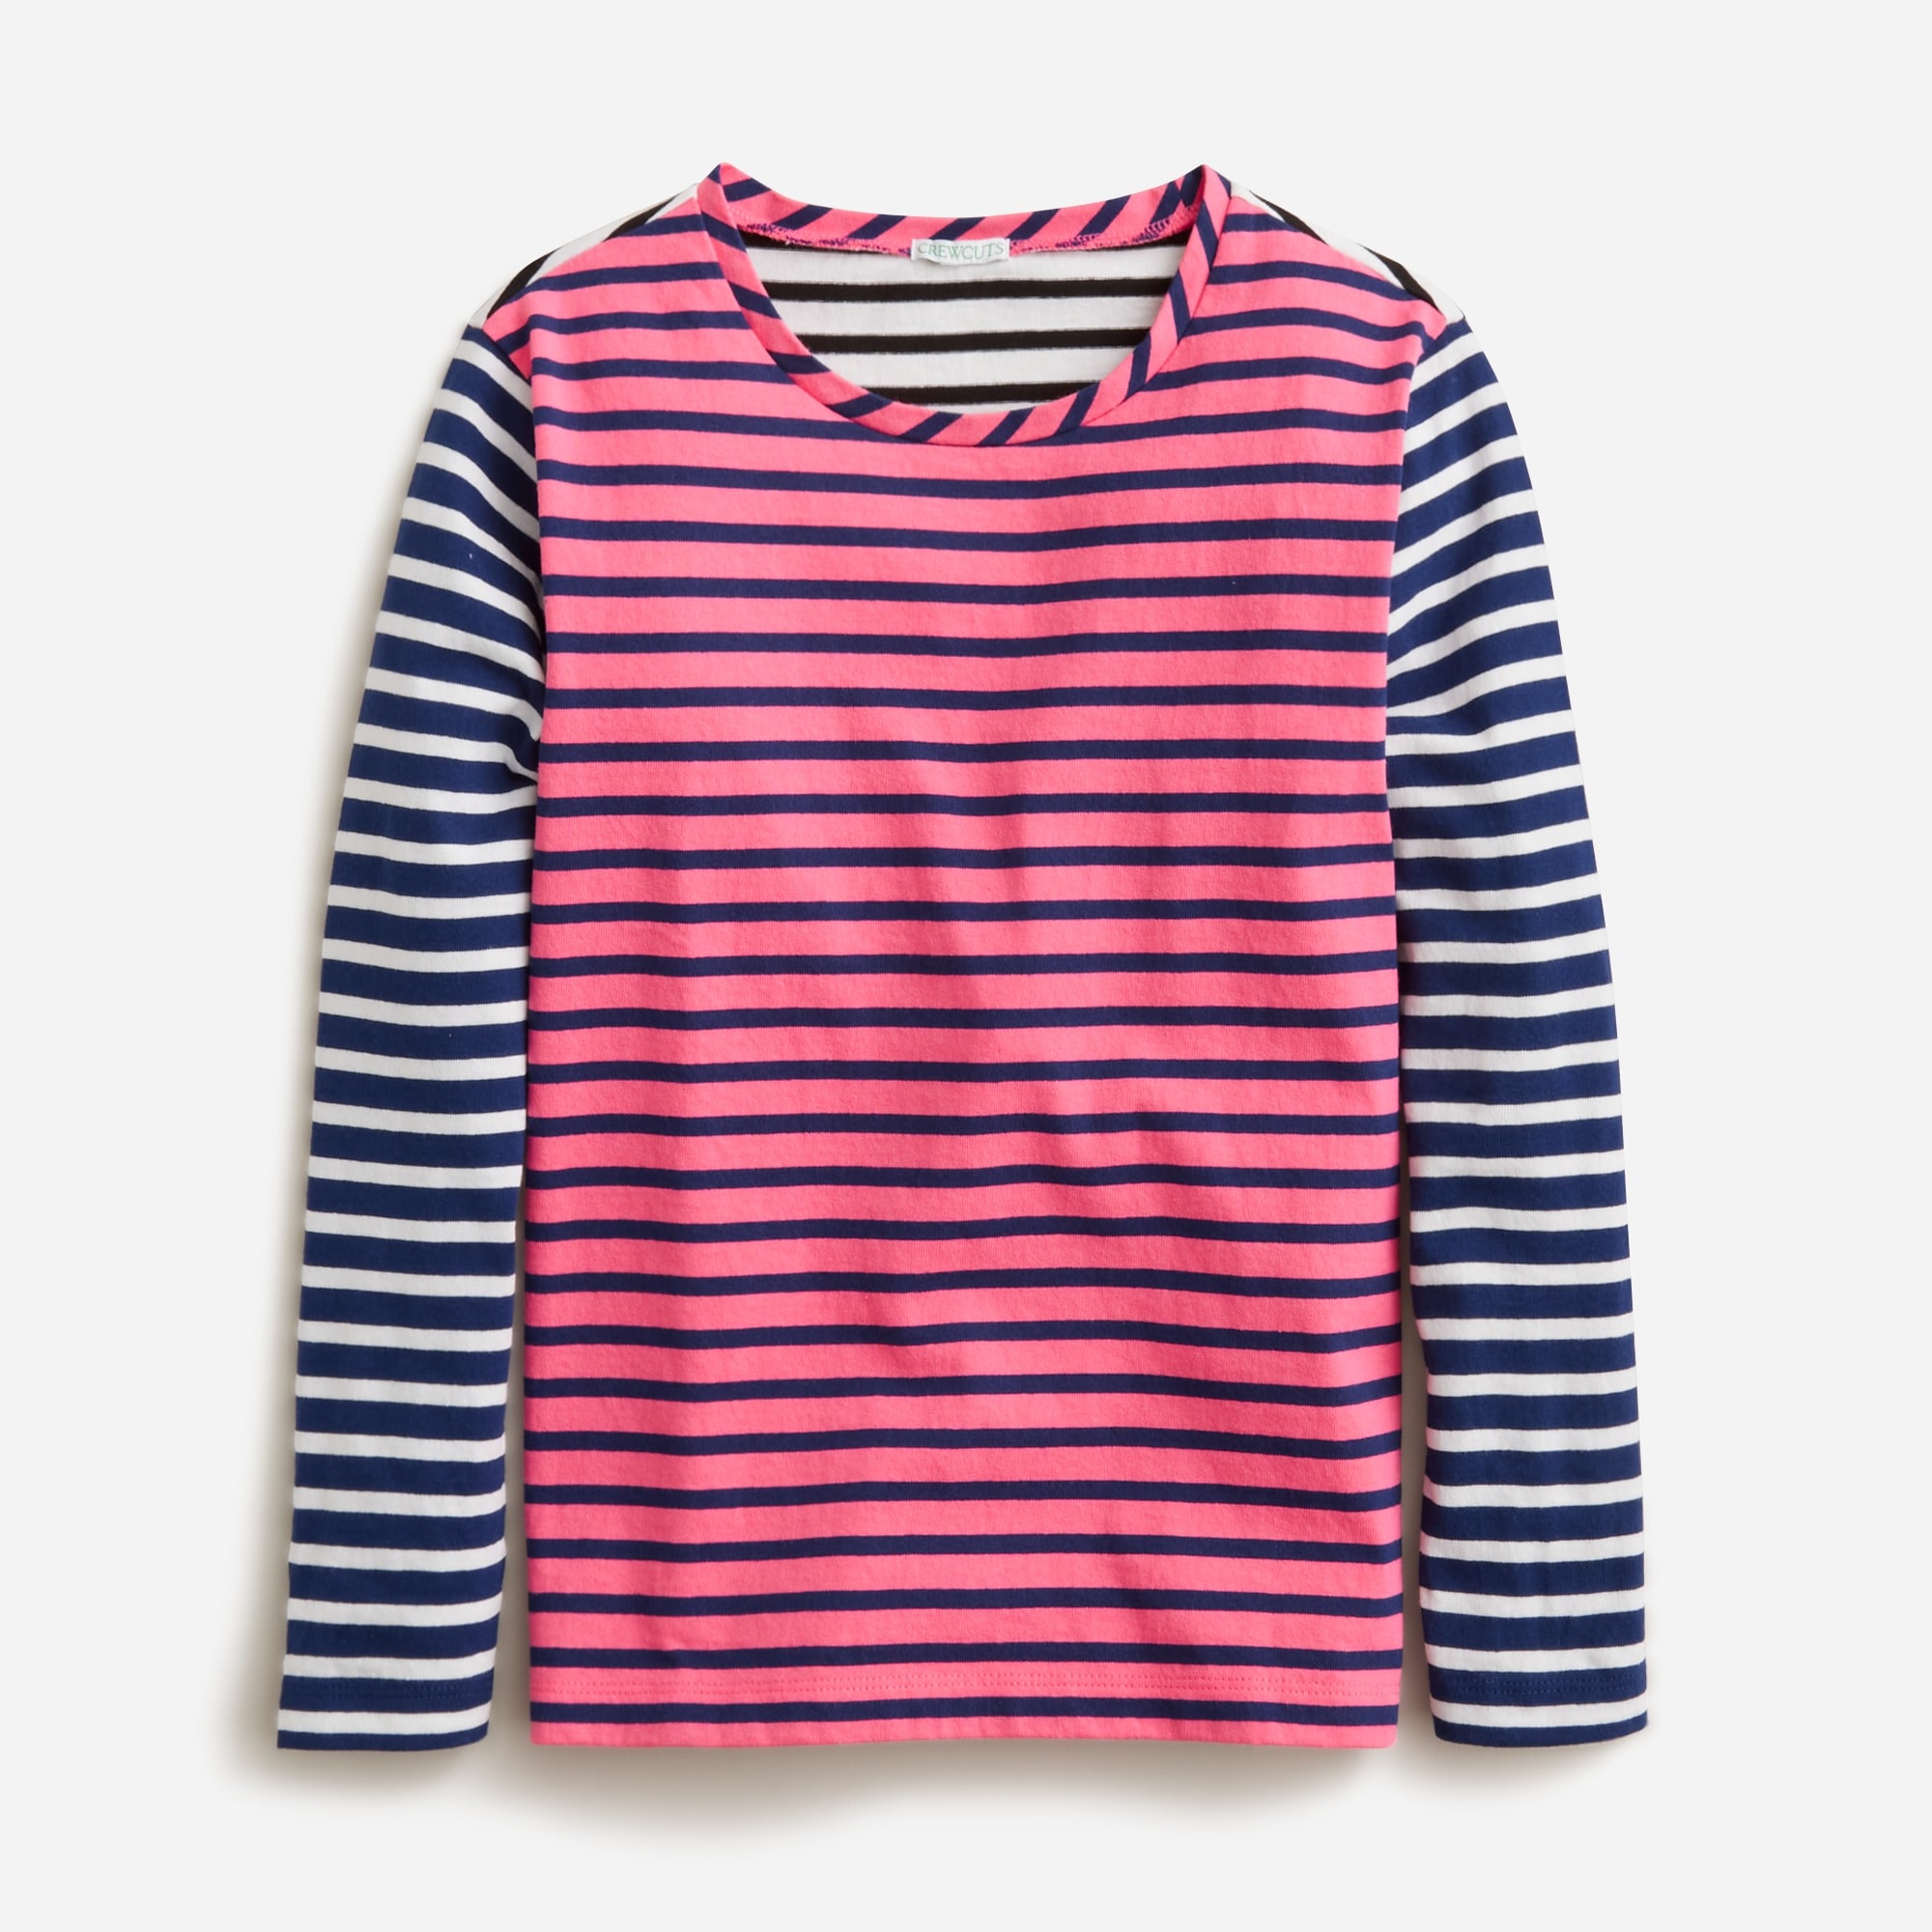 girls KID by crewcuts T-shirt in mixed stripe